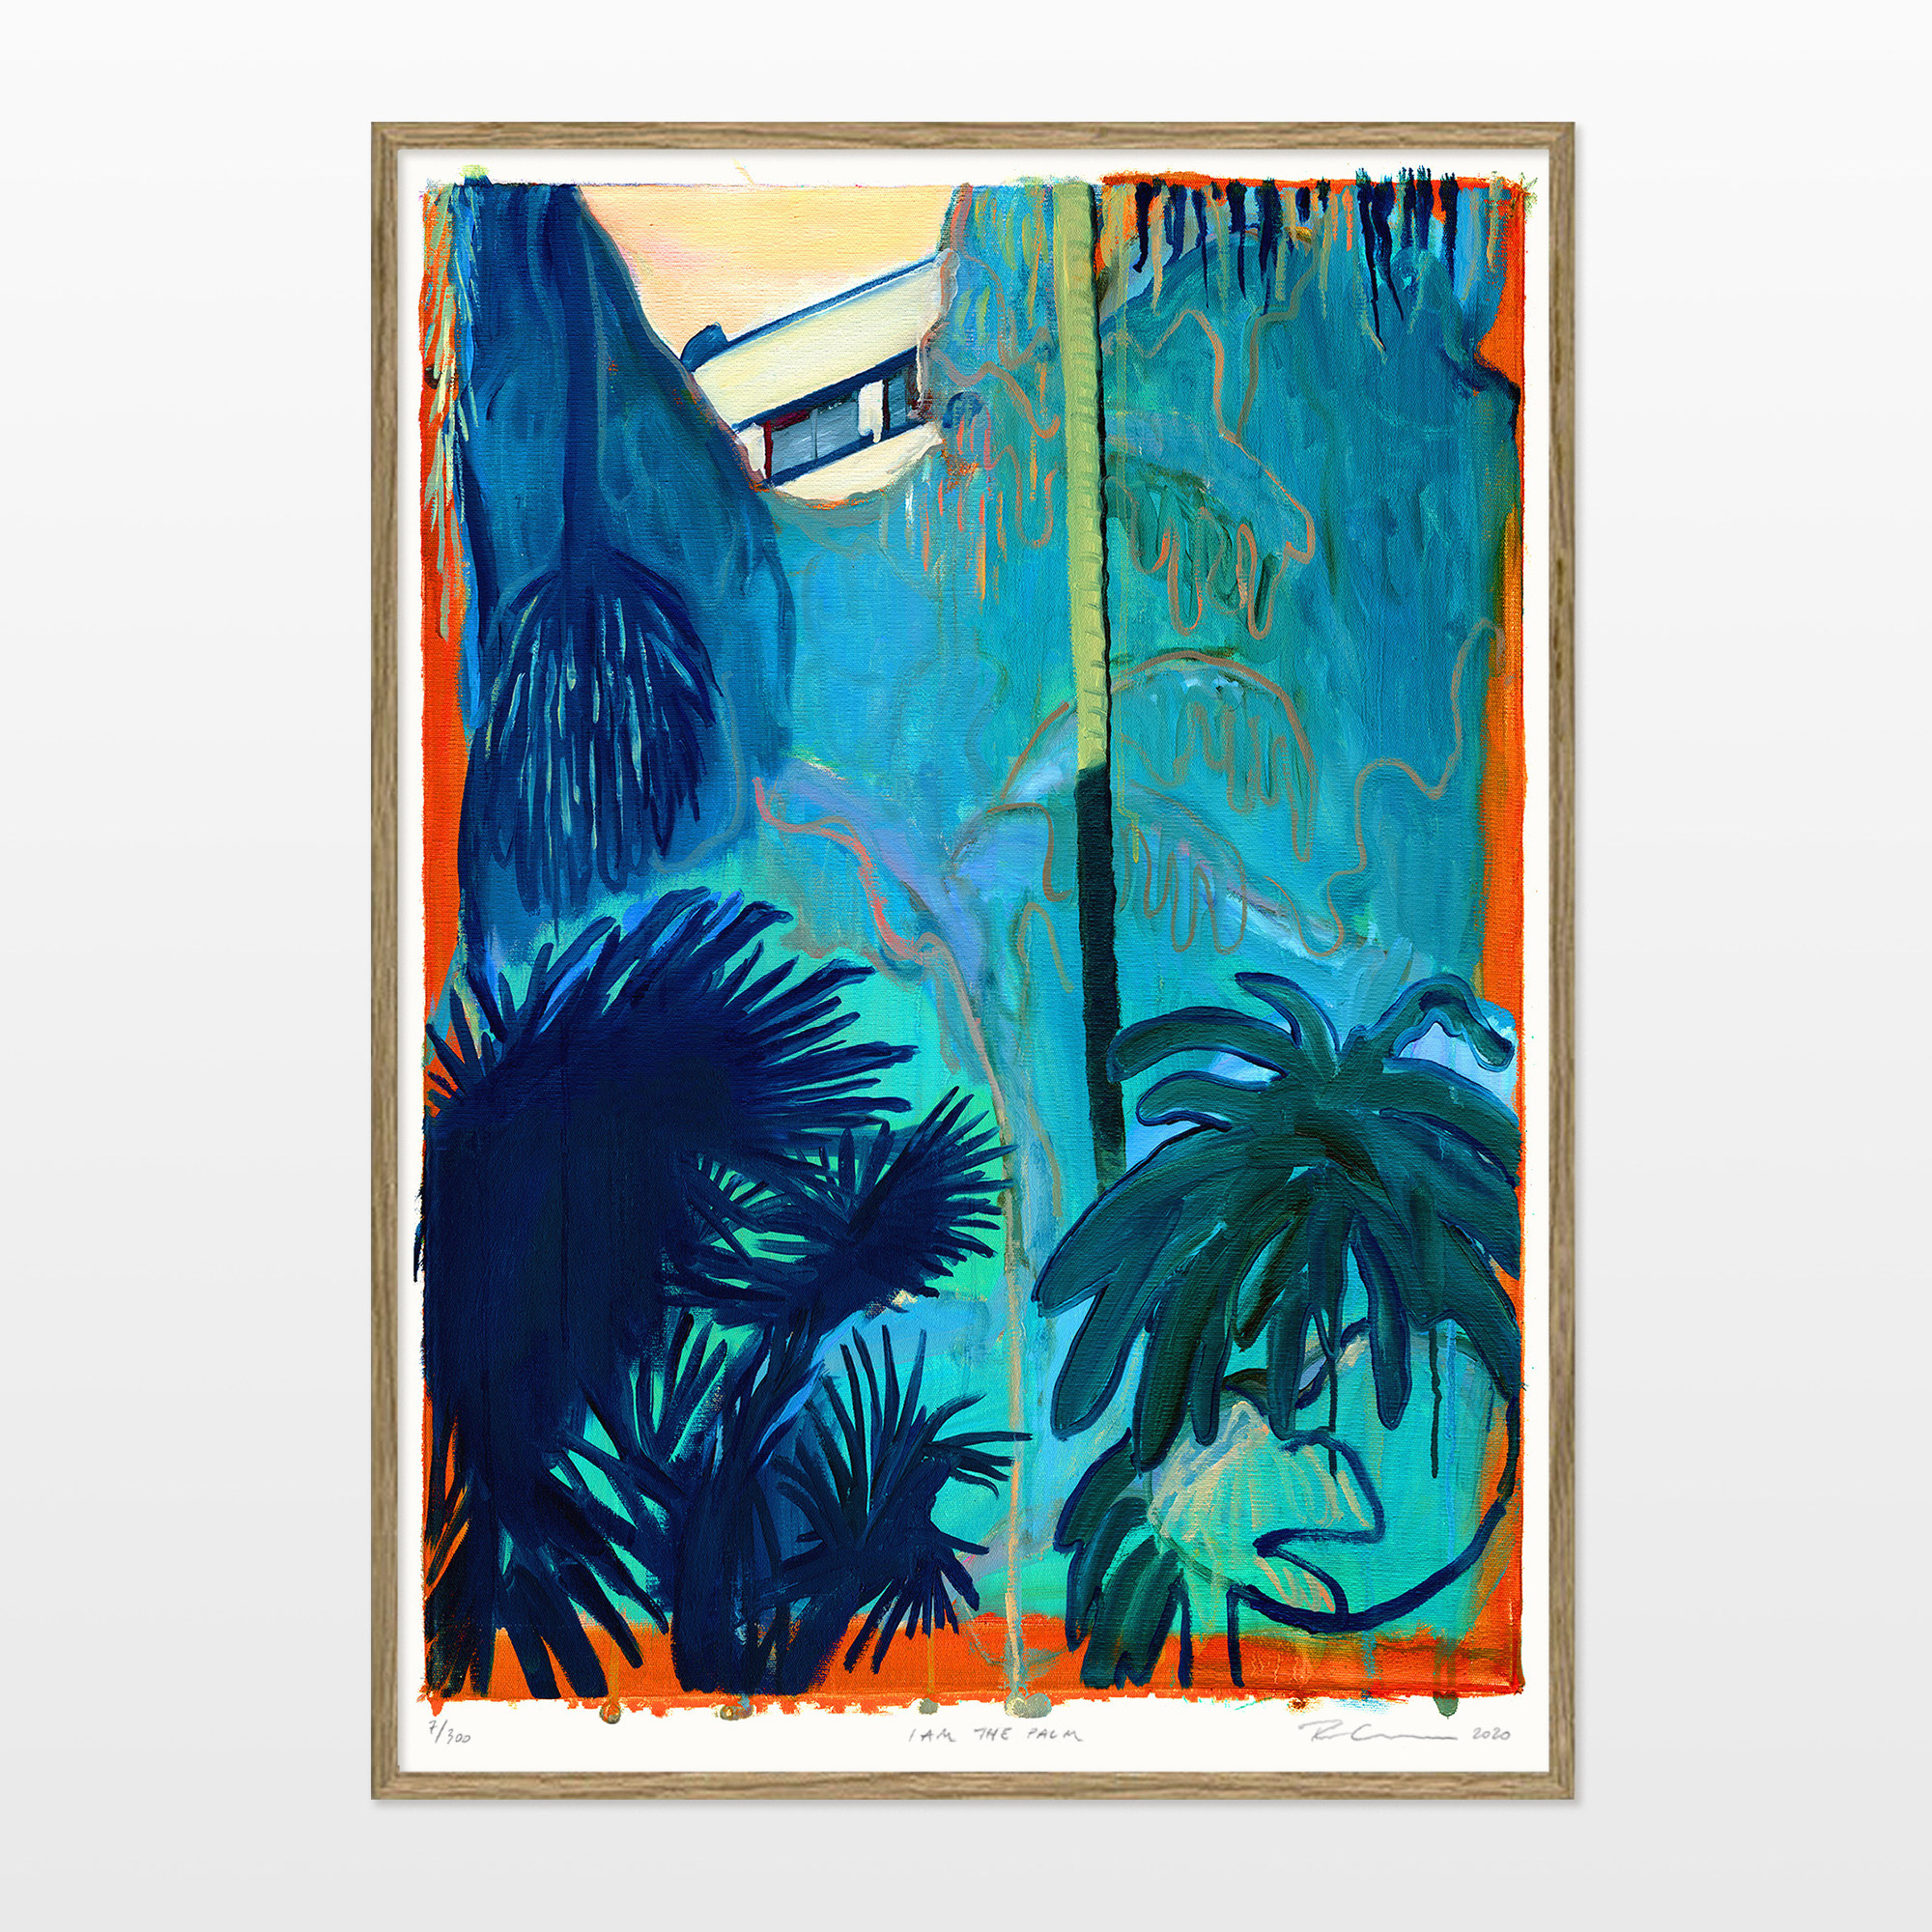 posters-prints, giclee-print, aesthetic, colorful, figurative, illustrative, landscape, botany, nature, blue, orange, turquoise, ink, paper, beautiful, contemporary-art, copenhagen, danish, decorative, design, forest, interior, interior-design, modern, modern-art, nordic, plants, posters, scandinavien, Buy original high quality art. Paintings, drawings, limited edition prints & posters by talented artists.